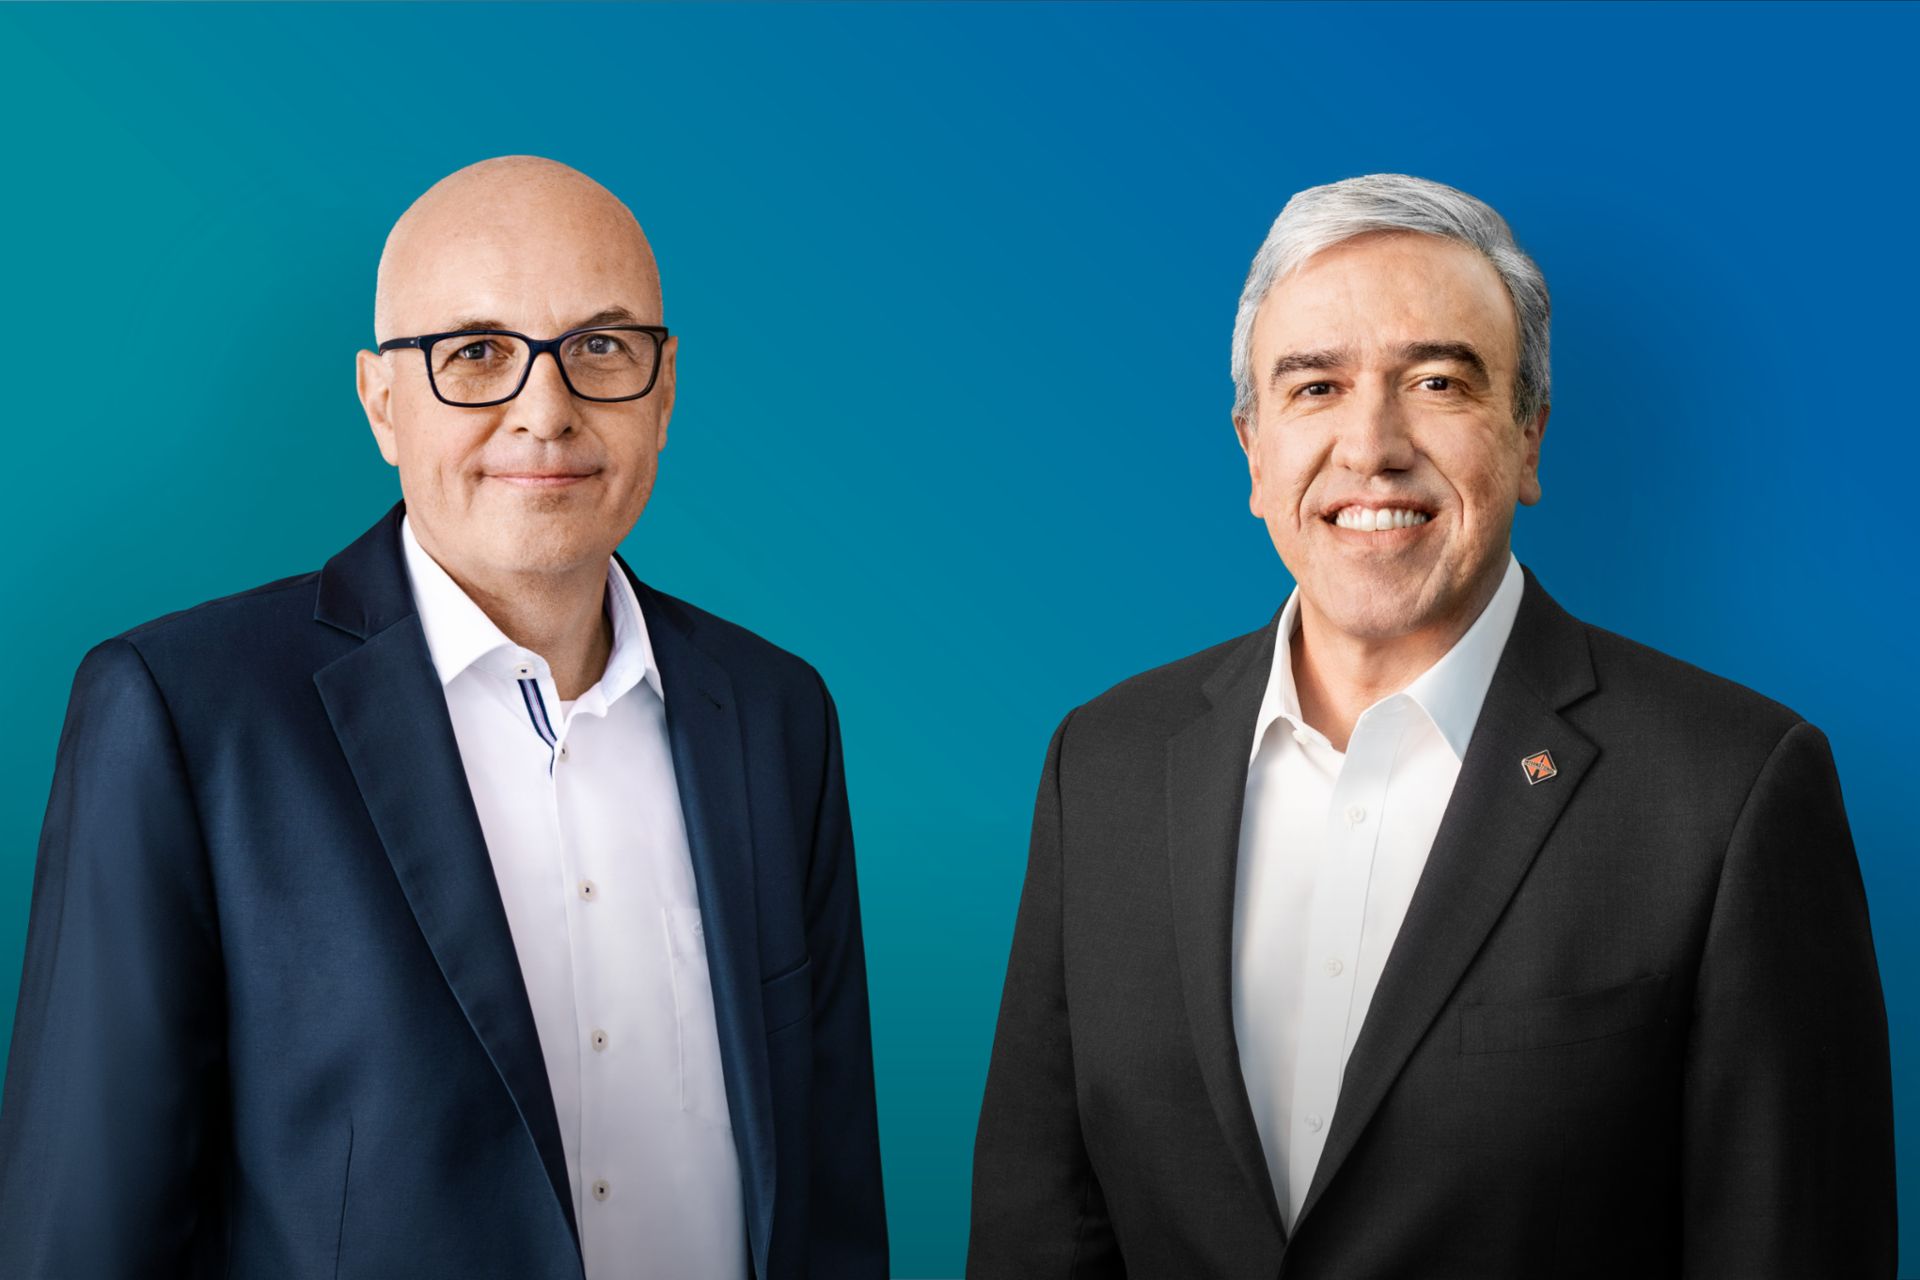 Image of Matthias Gründler (CEO TRATON SE, left) and Persio Lisboa (CEO Navistar Inc., right) in front of a blue background
                 